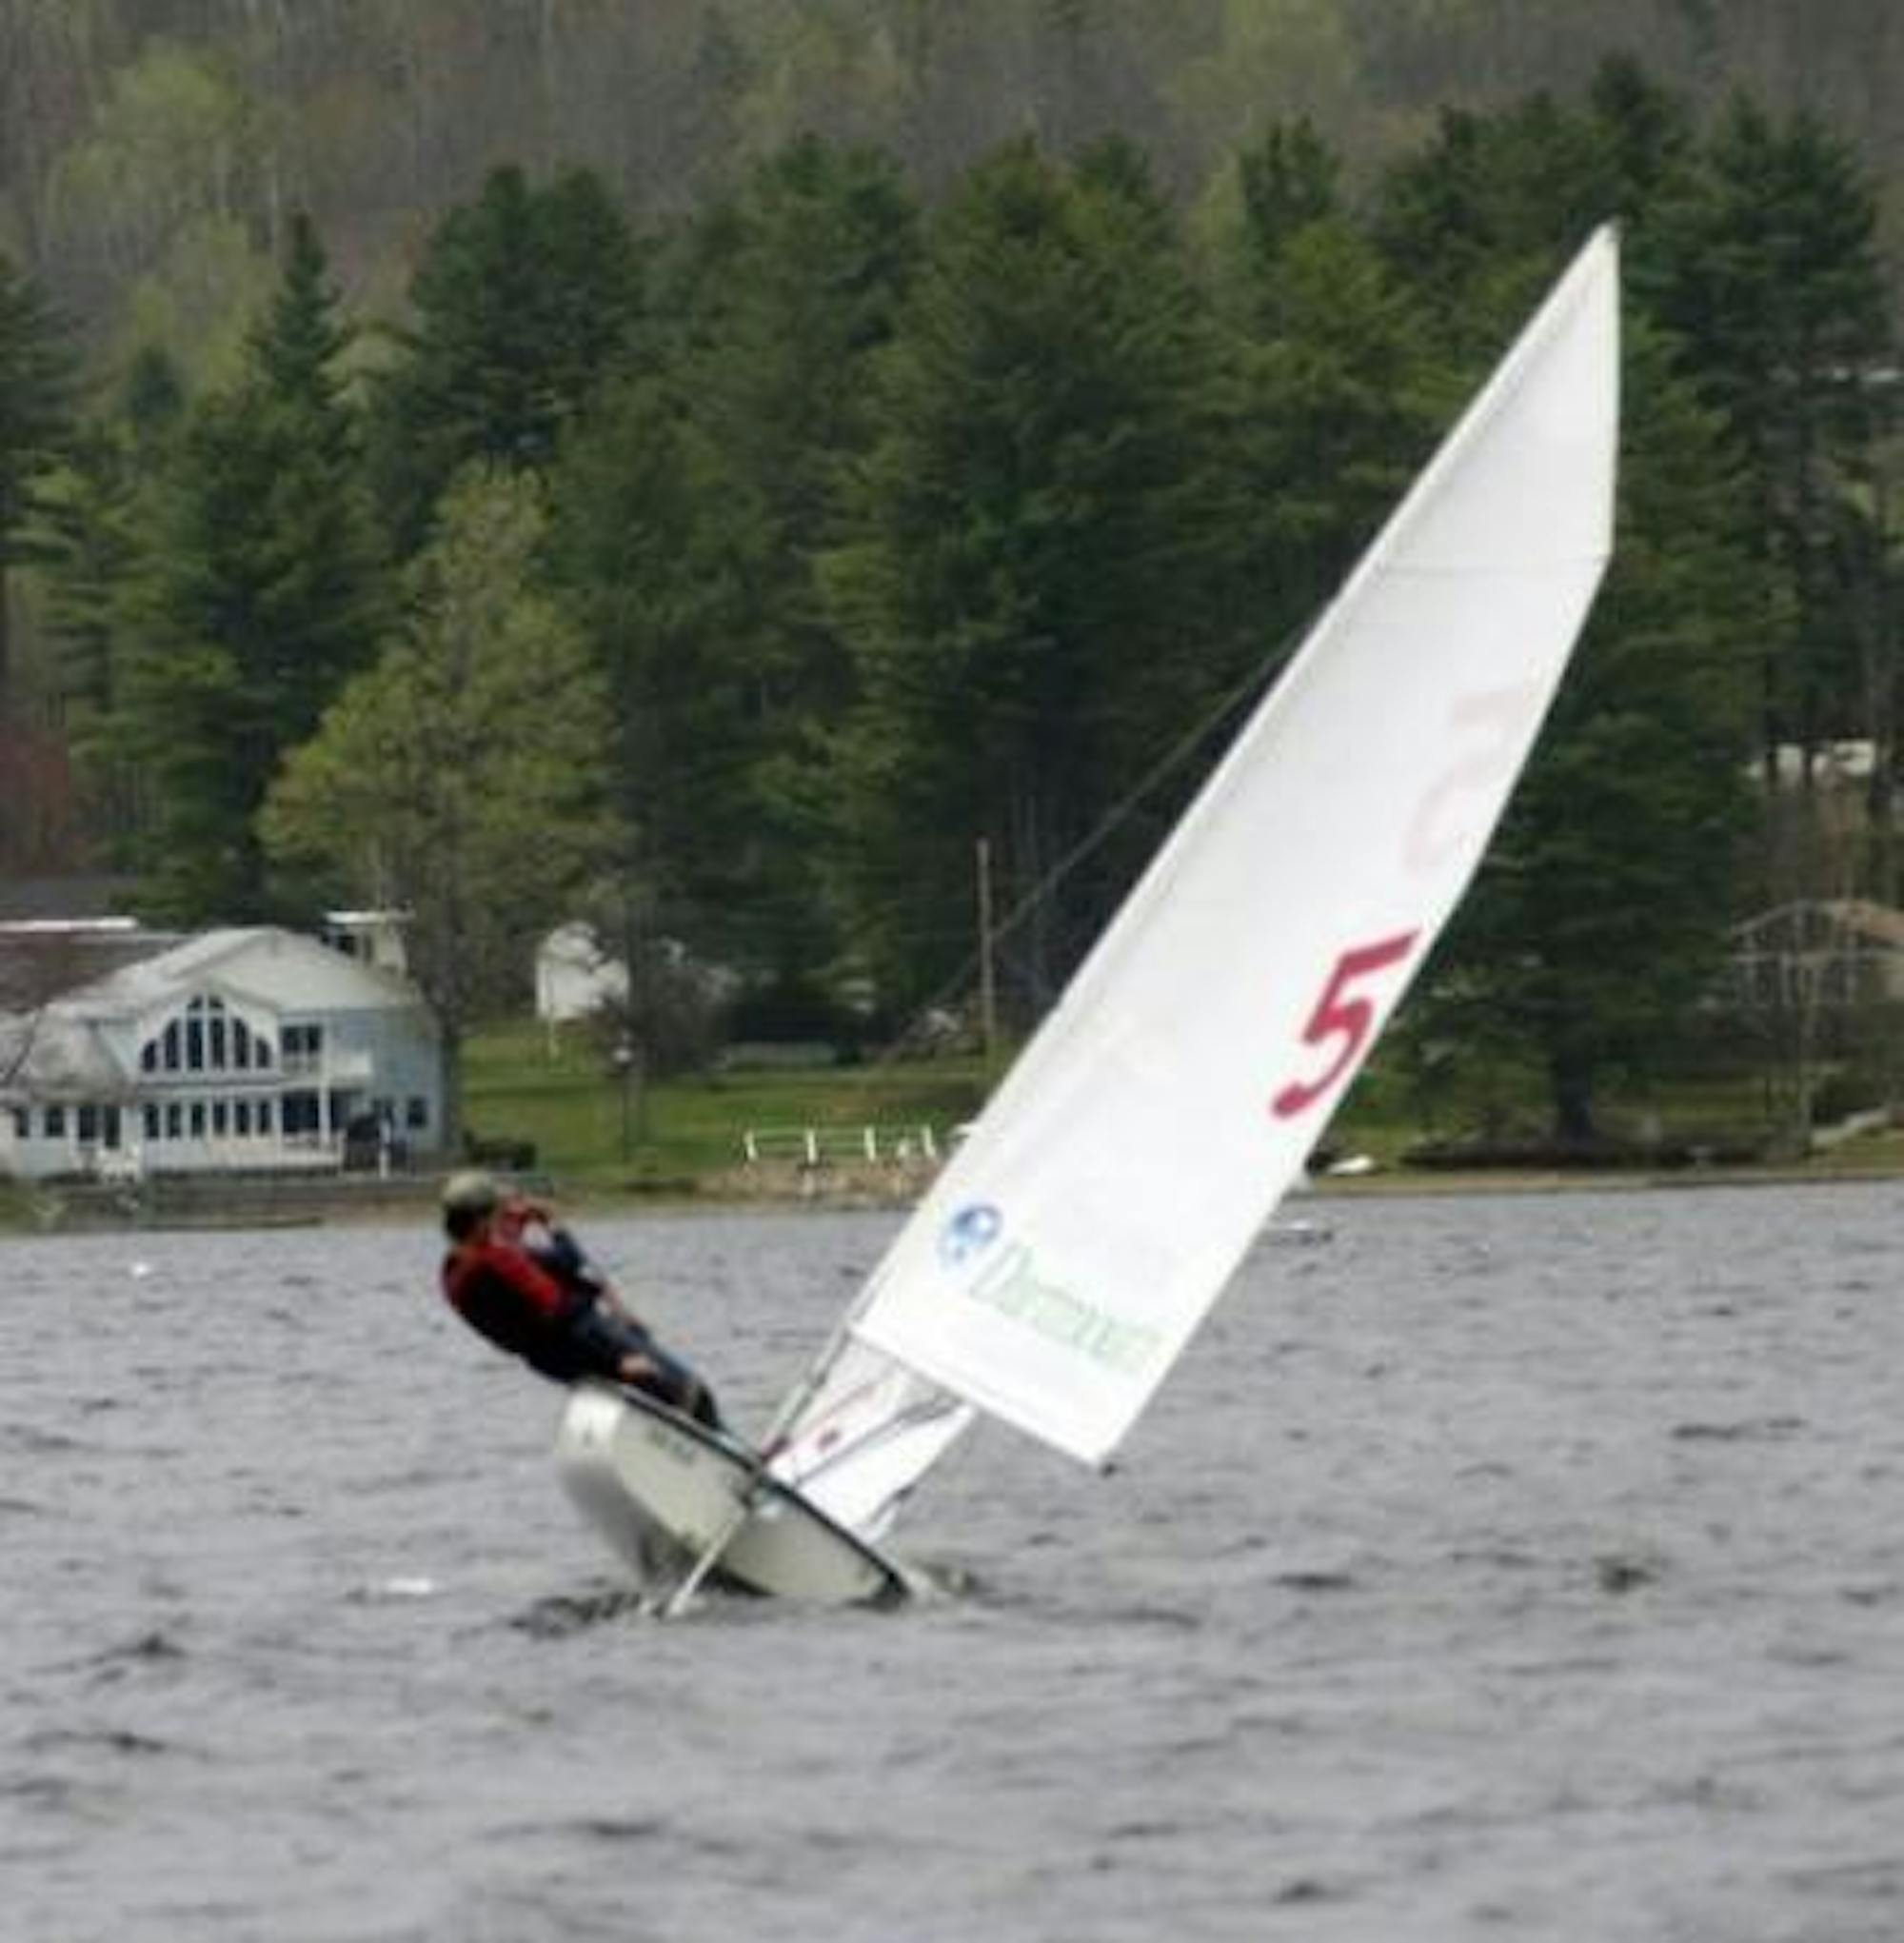 The Big Green sailing team fell from fourth place to post an eighth-place finish in the ICSA Women's National tournament.